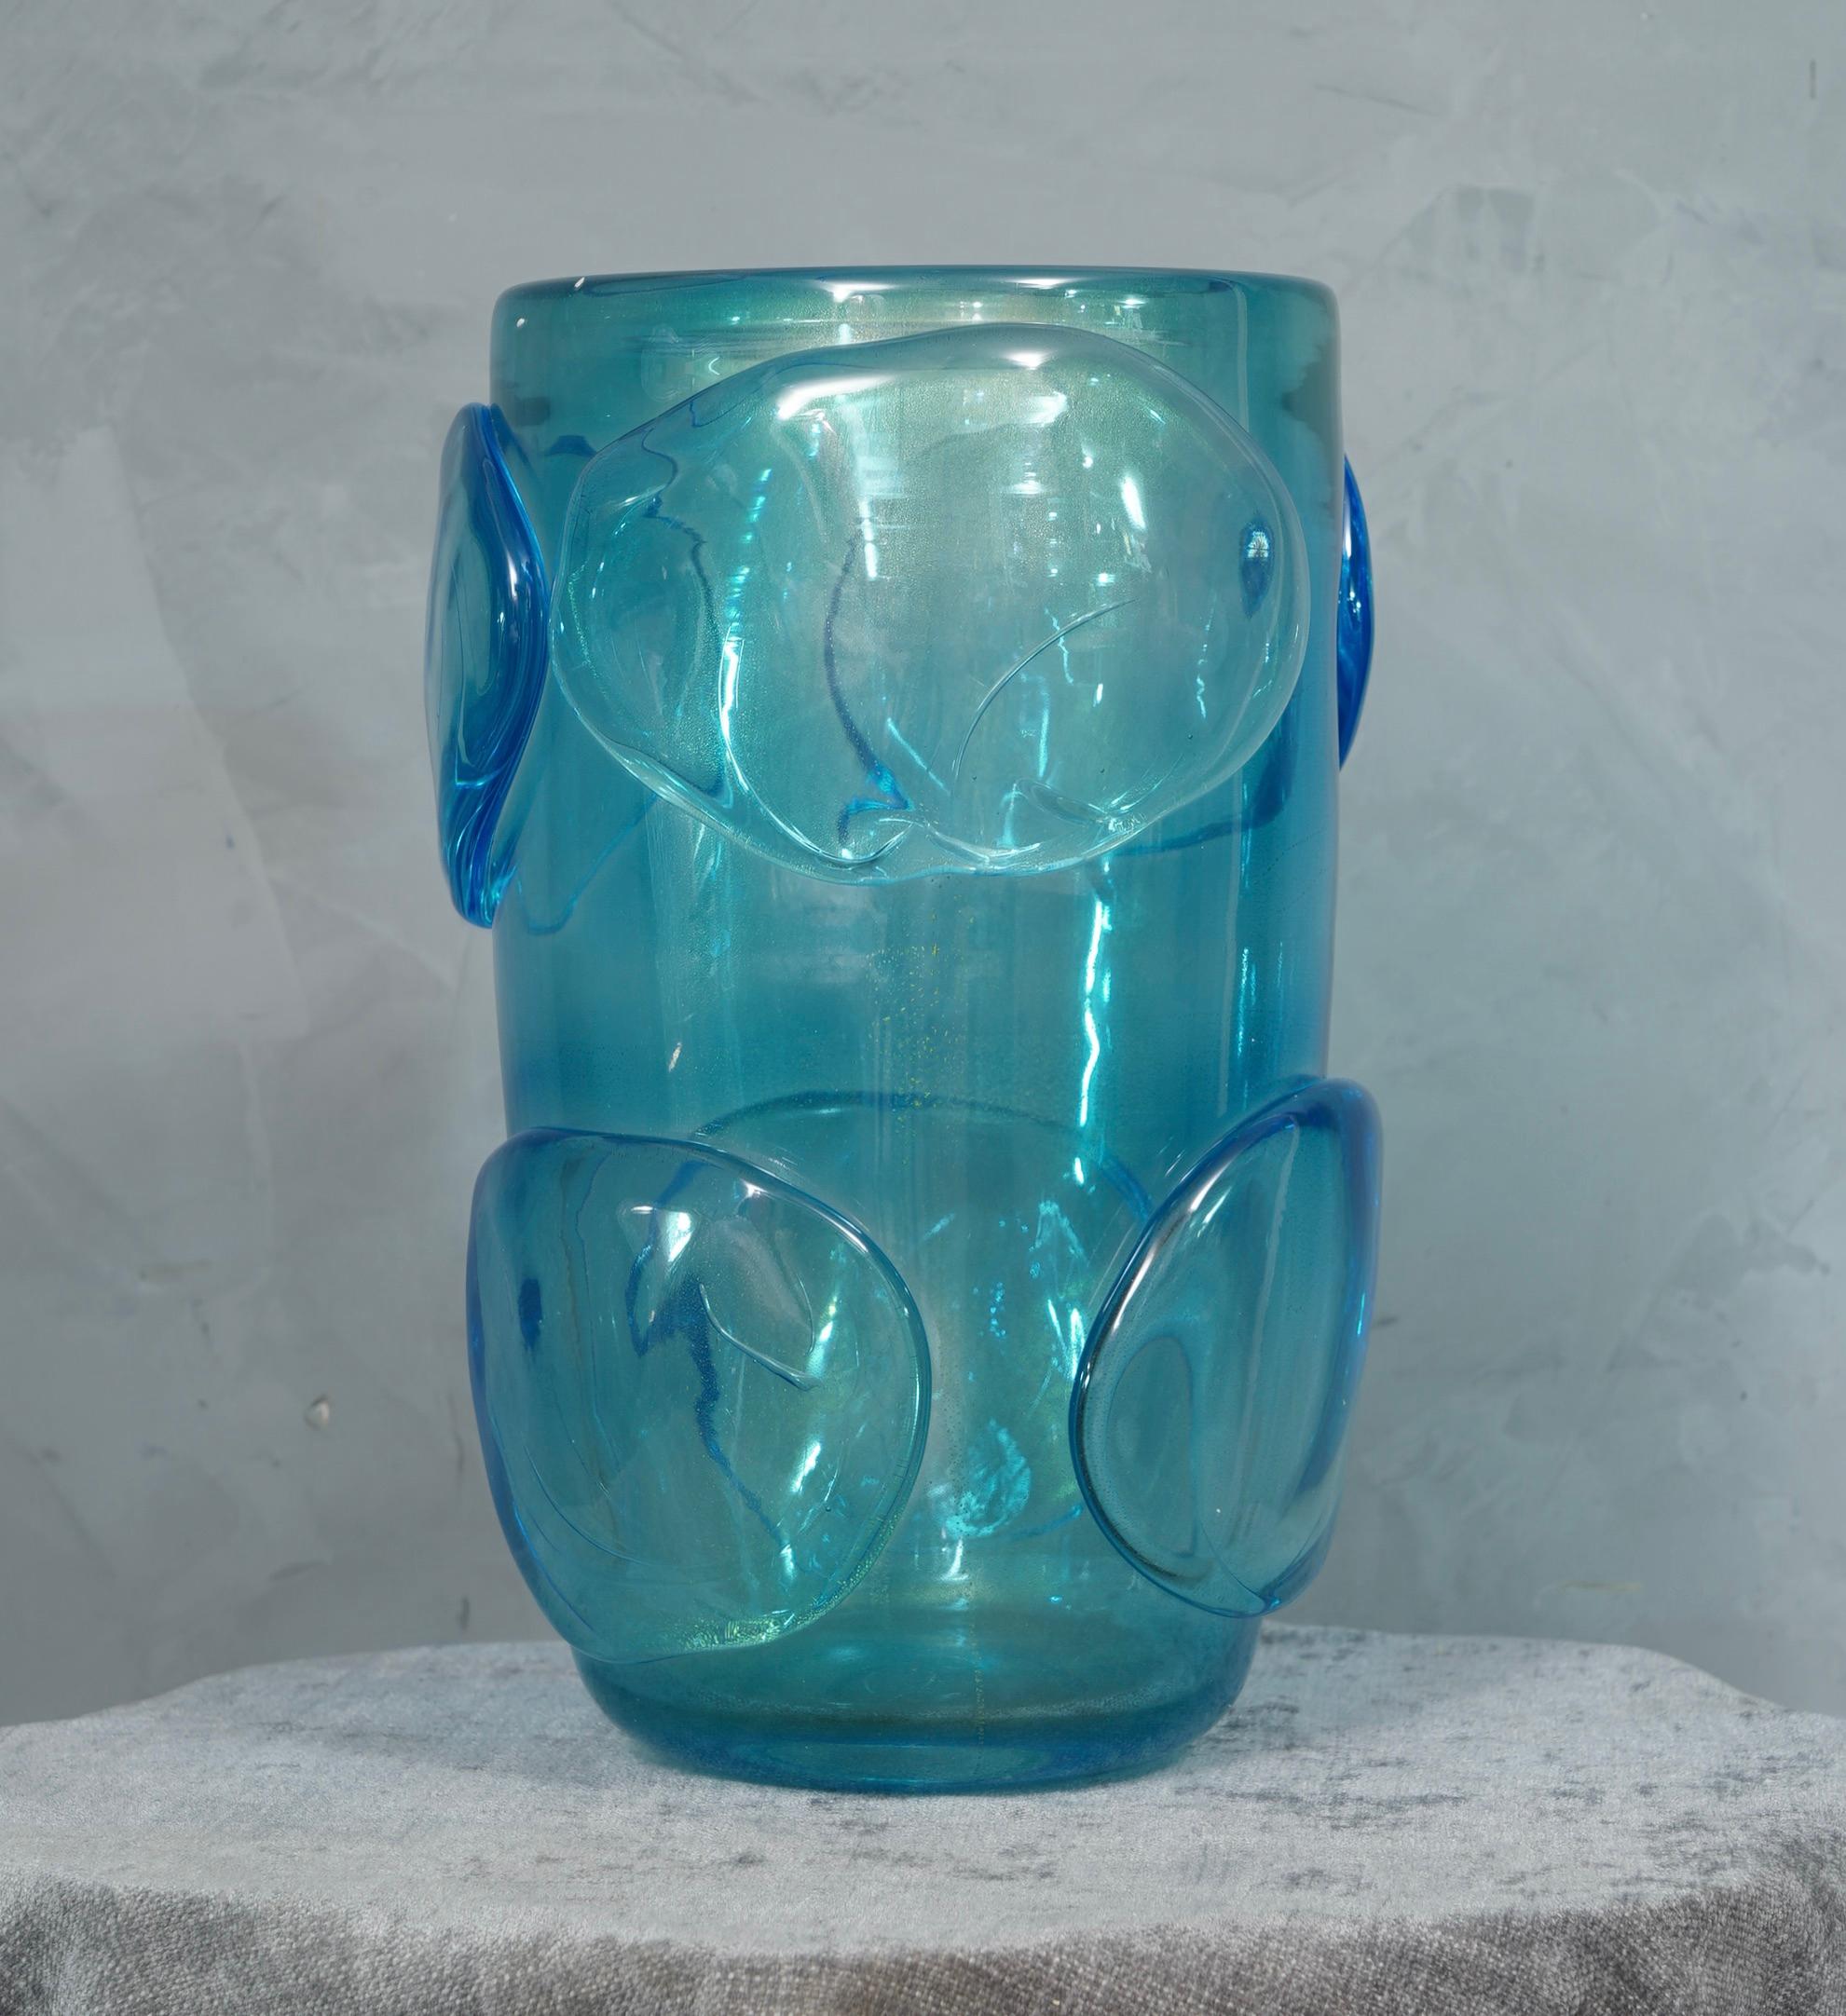 Splendid Vase in blu marine color Murano glass. Note the beautiful hot-attached spherical drops. A supreme artistic manufacture. You can feel all the Venetian flavor in this factory.

The vase is composed of a large upper cup, on which differently